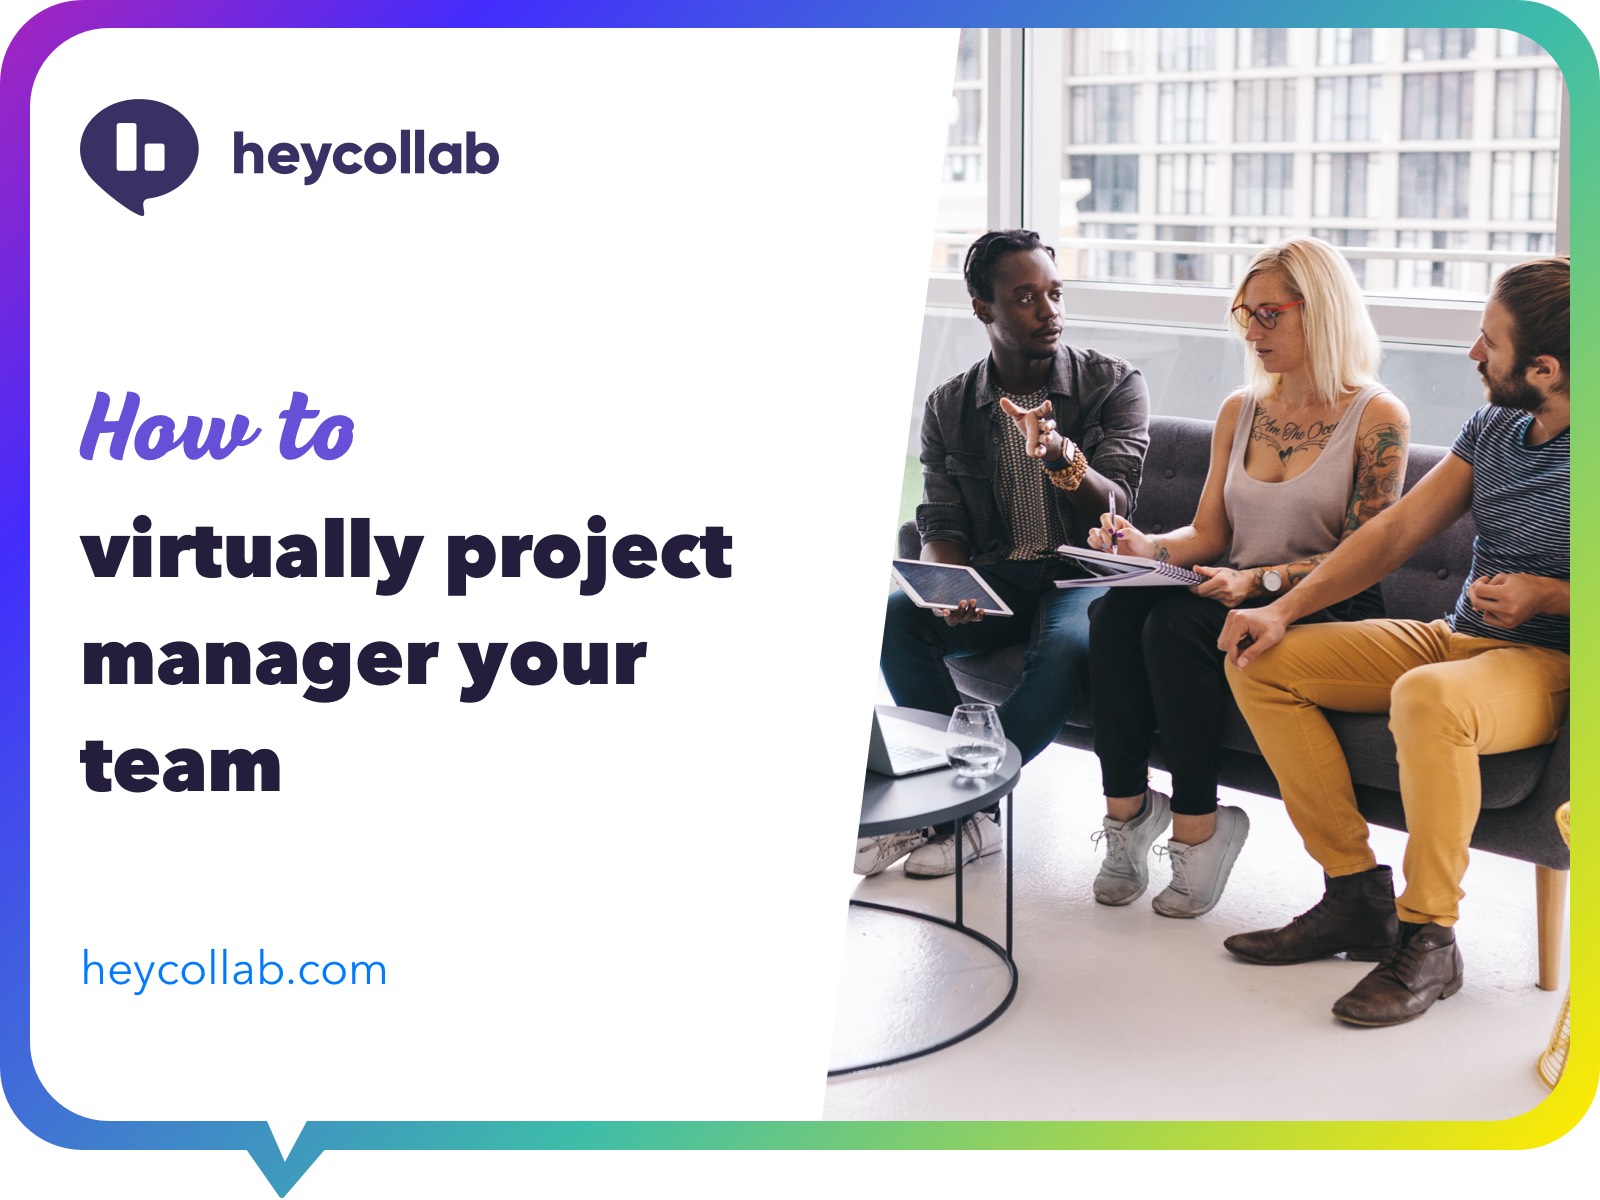 heycollab virtually manage your team